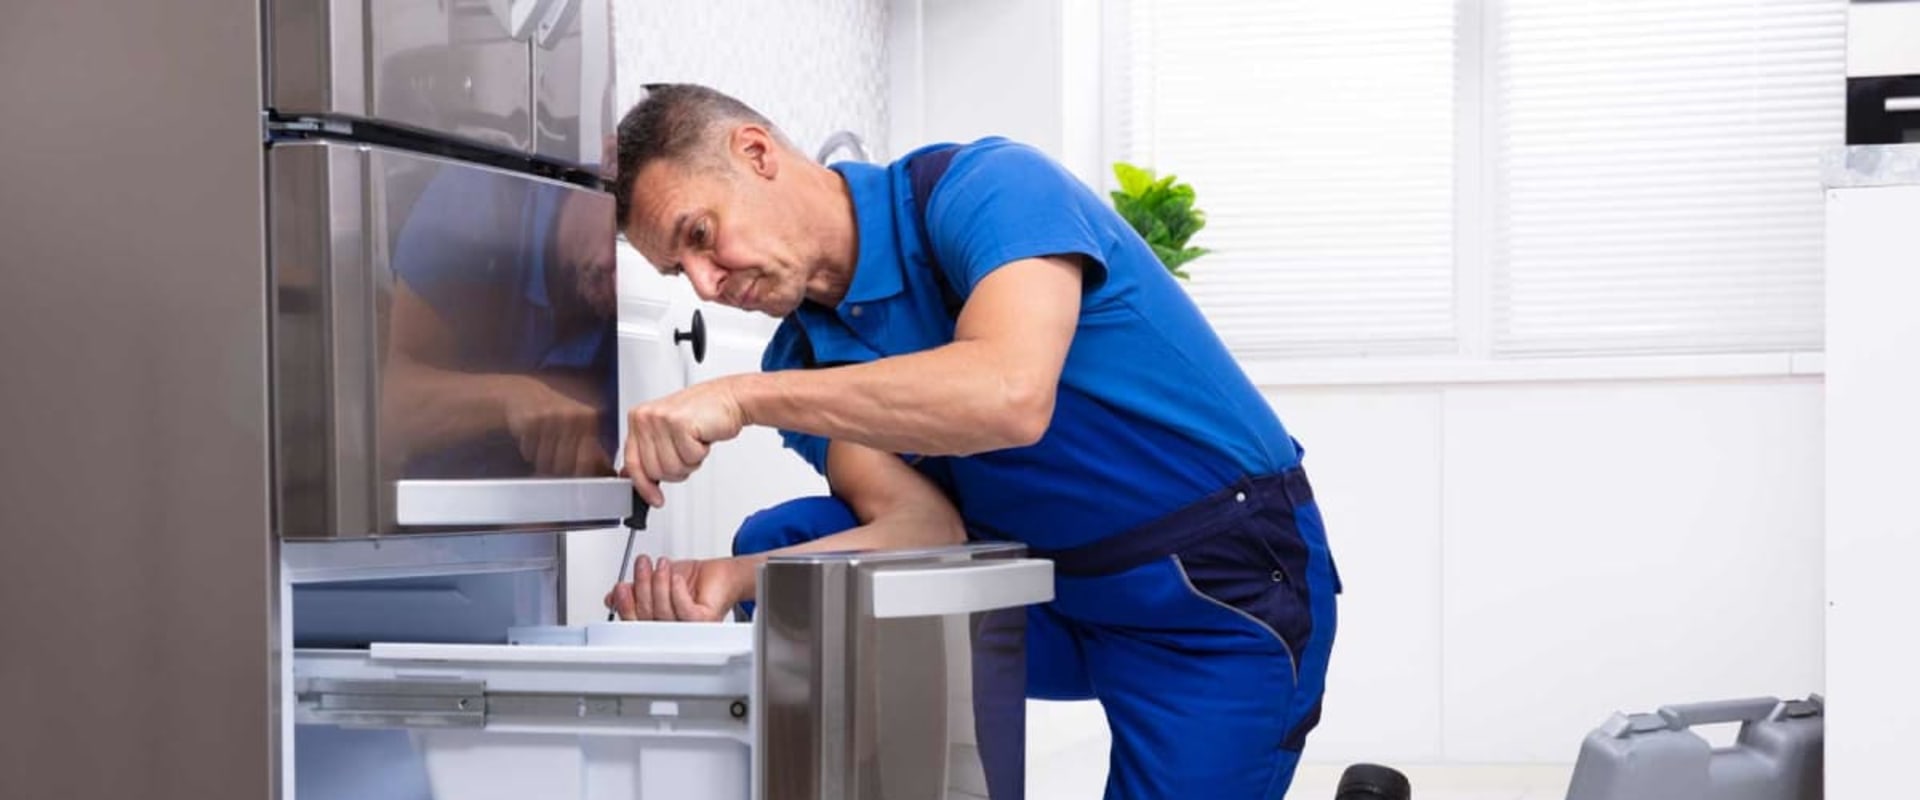 Repair or Replace: The Expert's Guide to Fixing Your Fridge